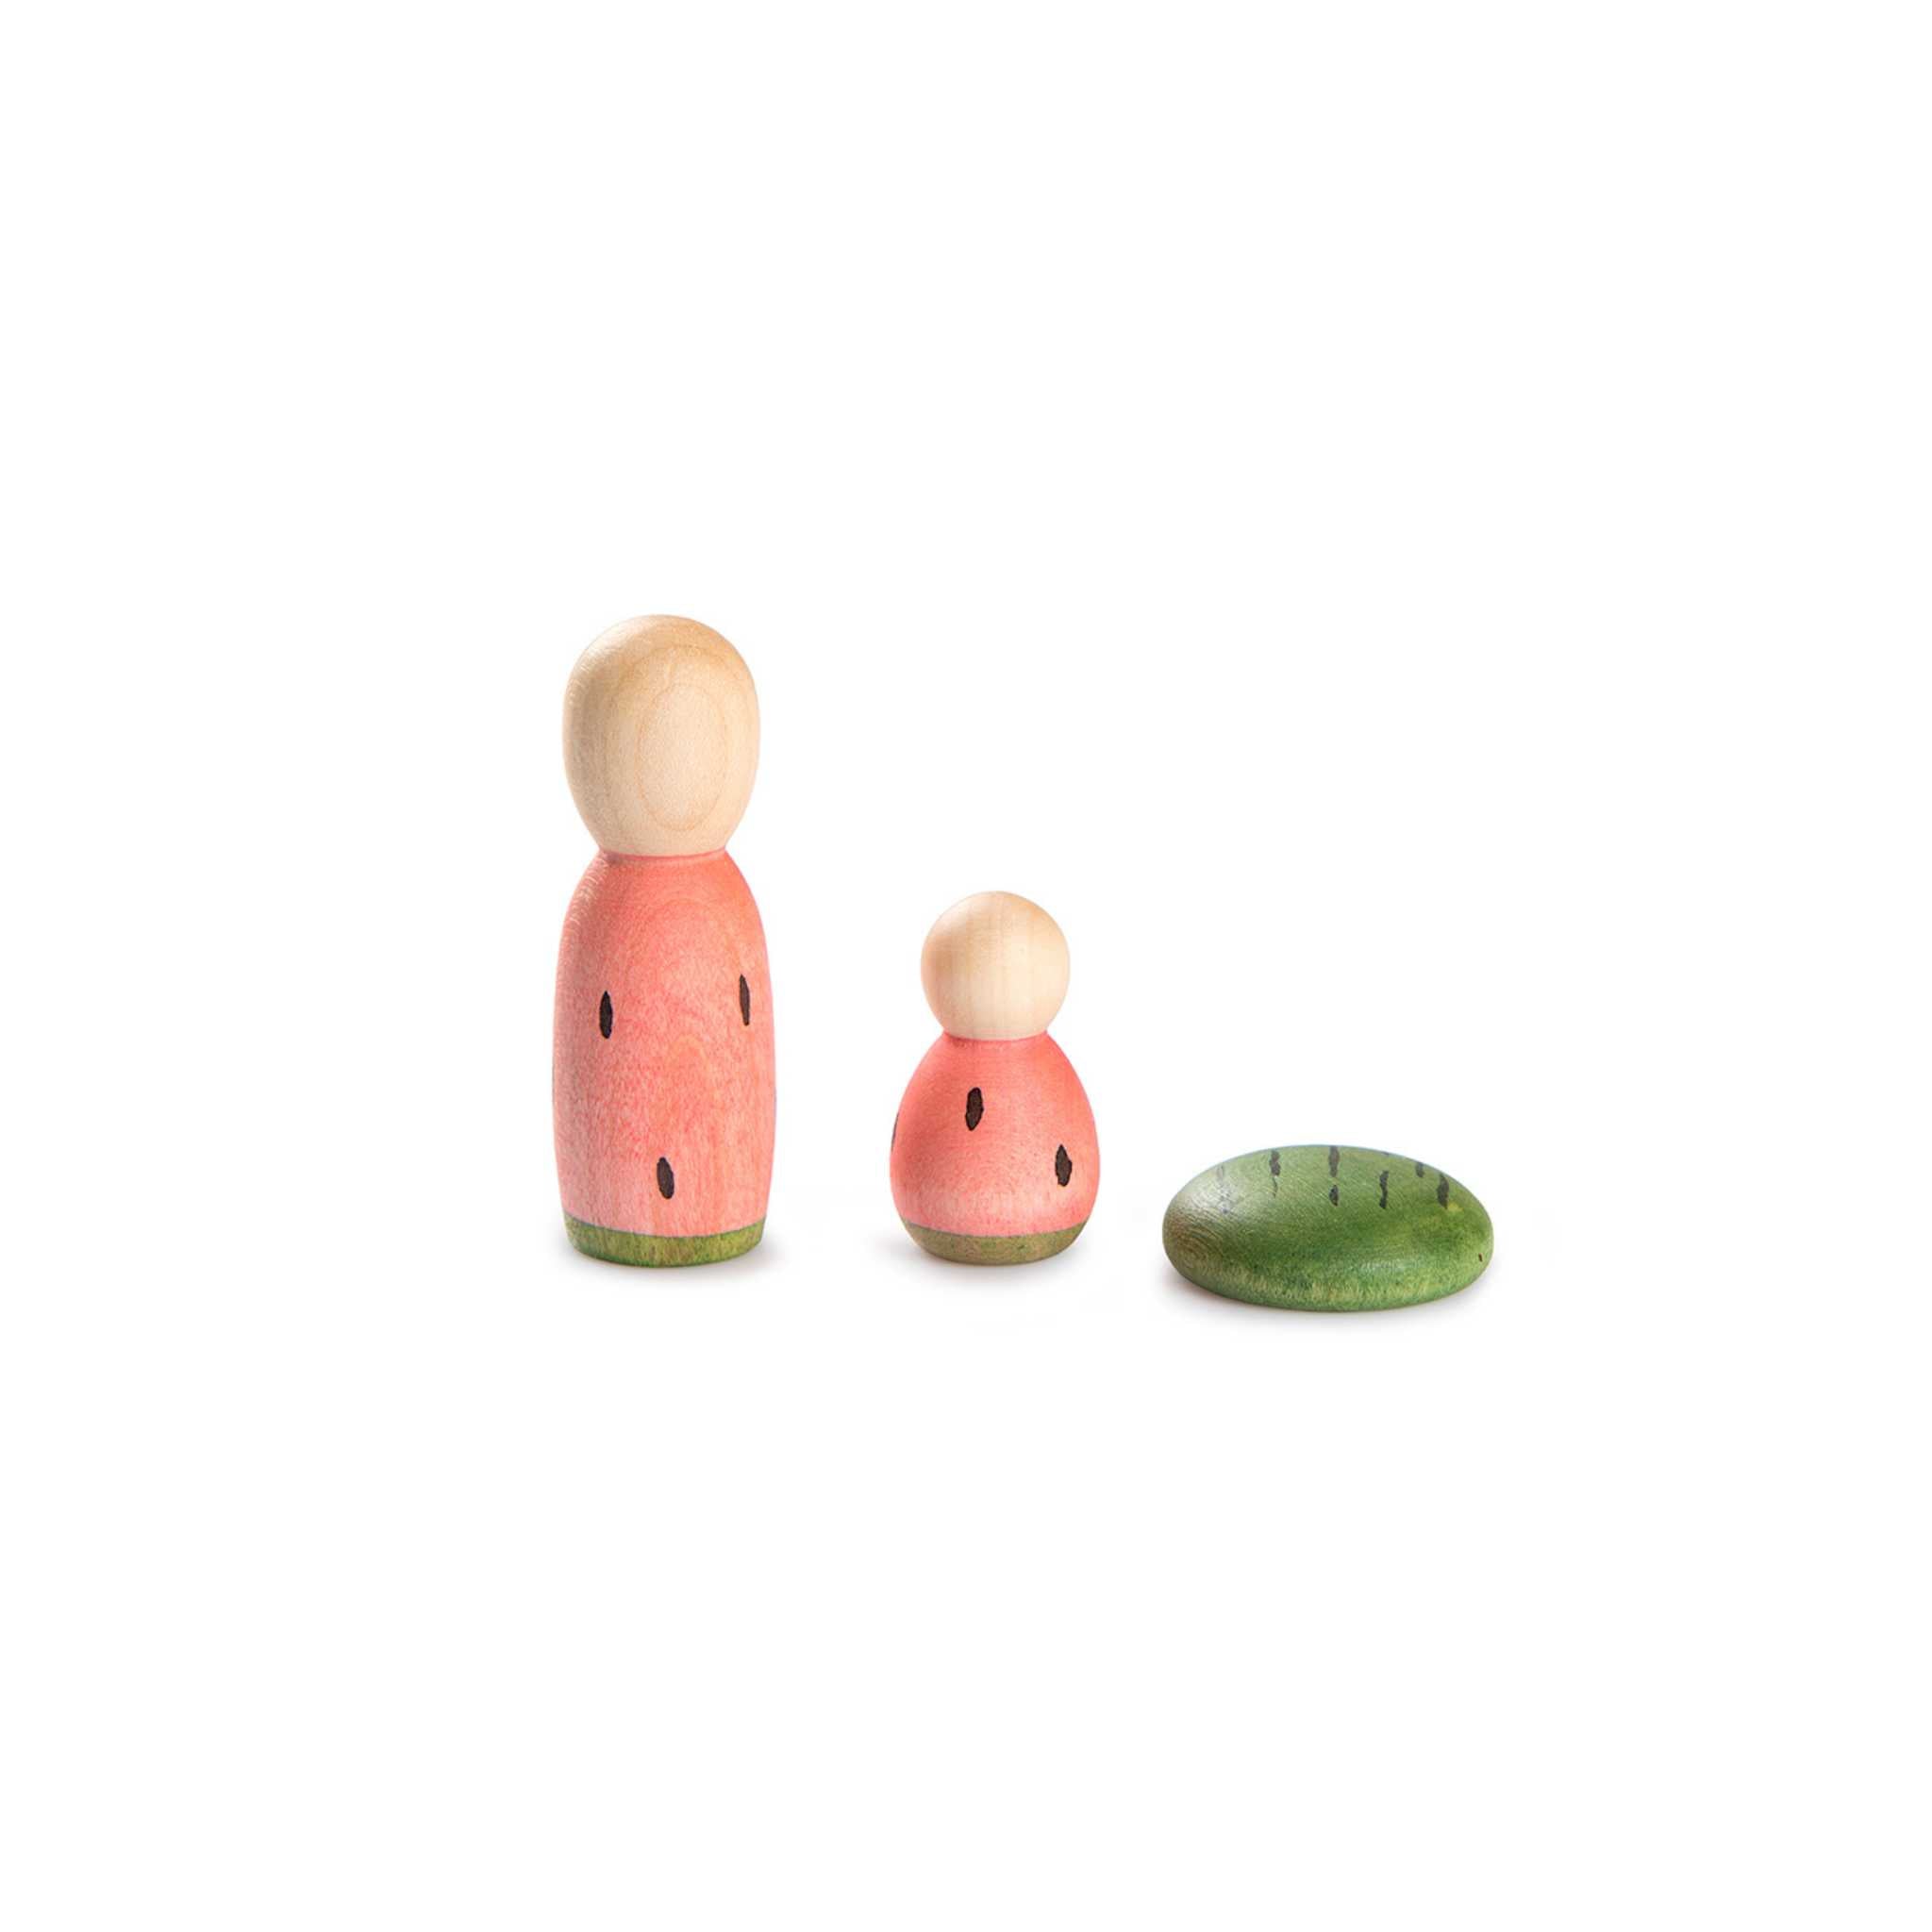 3 Pink and Green Wooden Toys From Grapat Lucky Lucky Collection on White Background